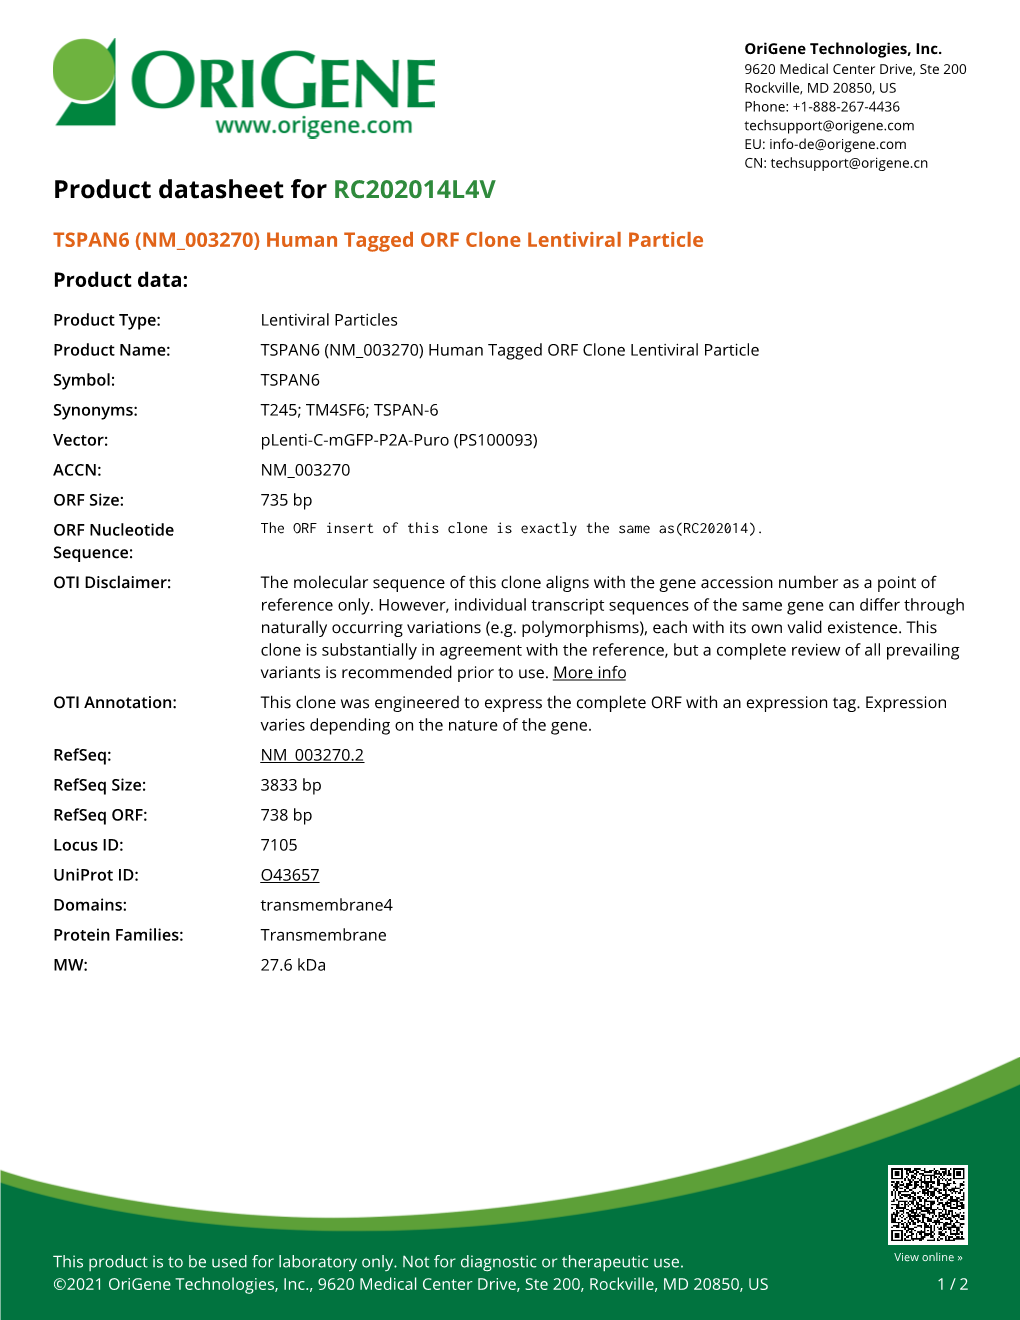 TSPAN6 (NM 003270) Human Tagged ORF Clone Lentiviral Particle Product Data